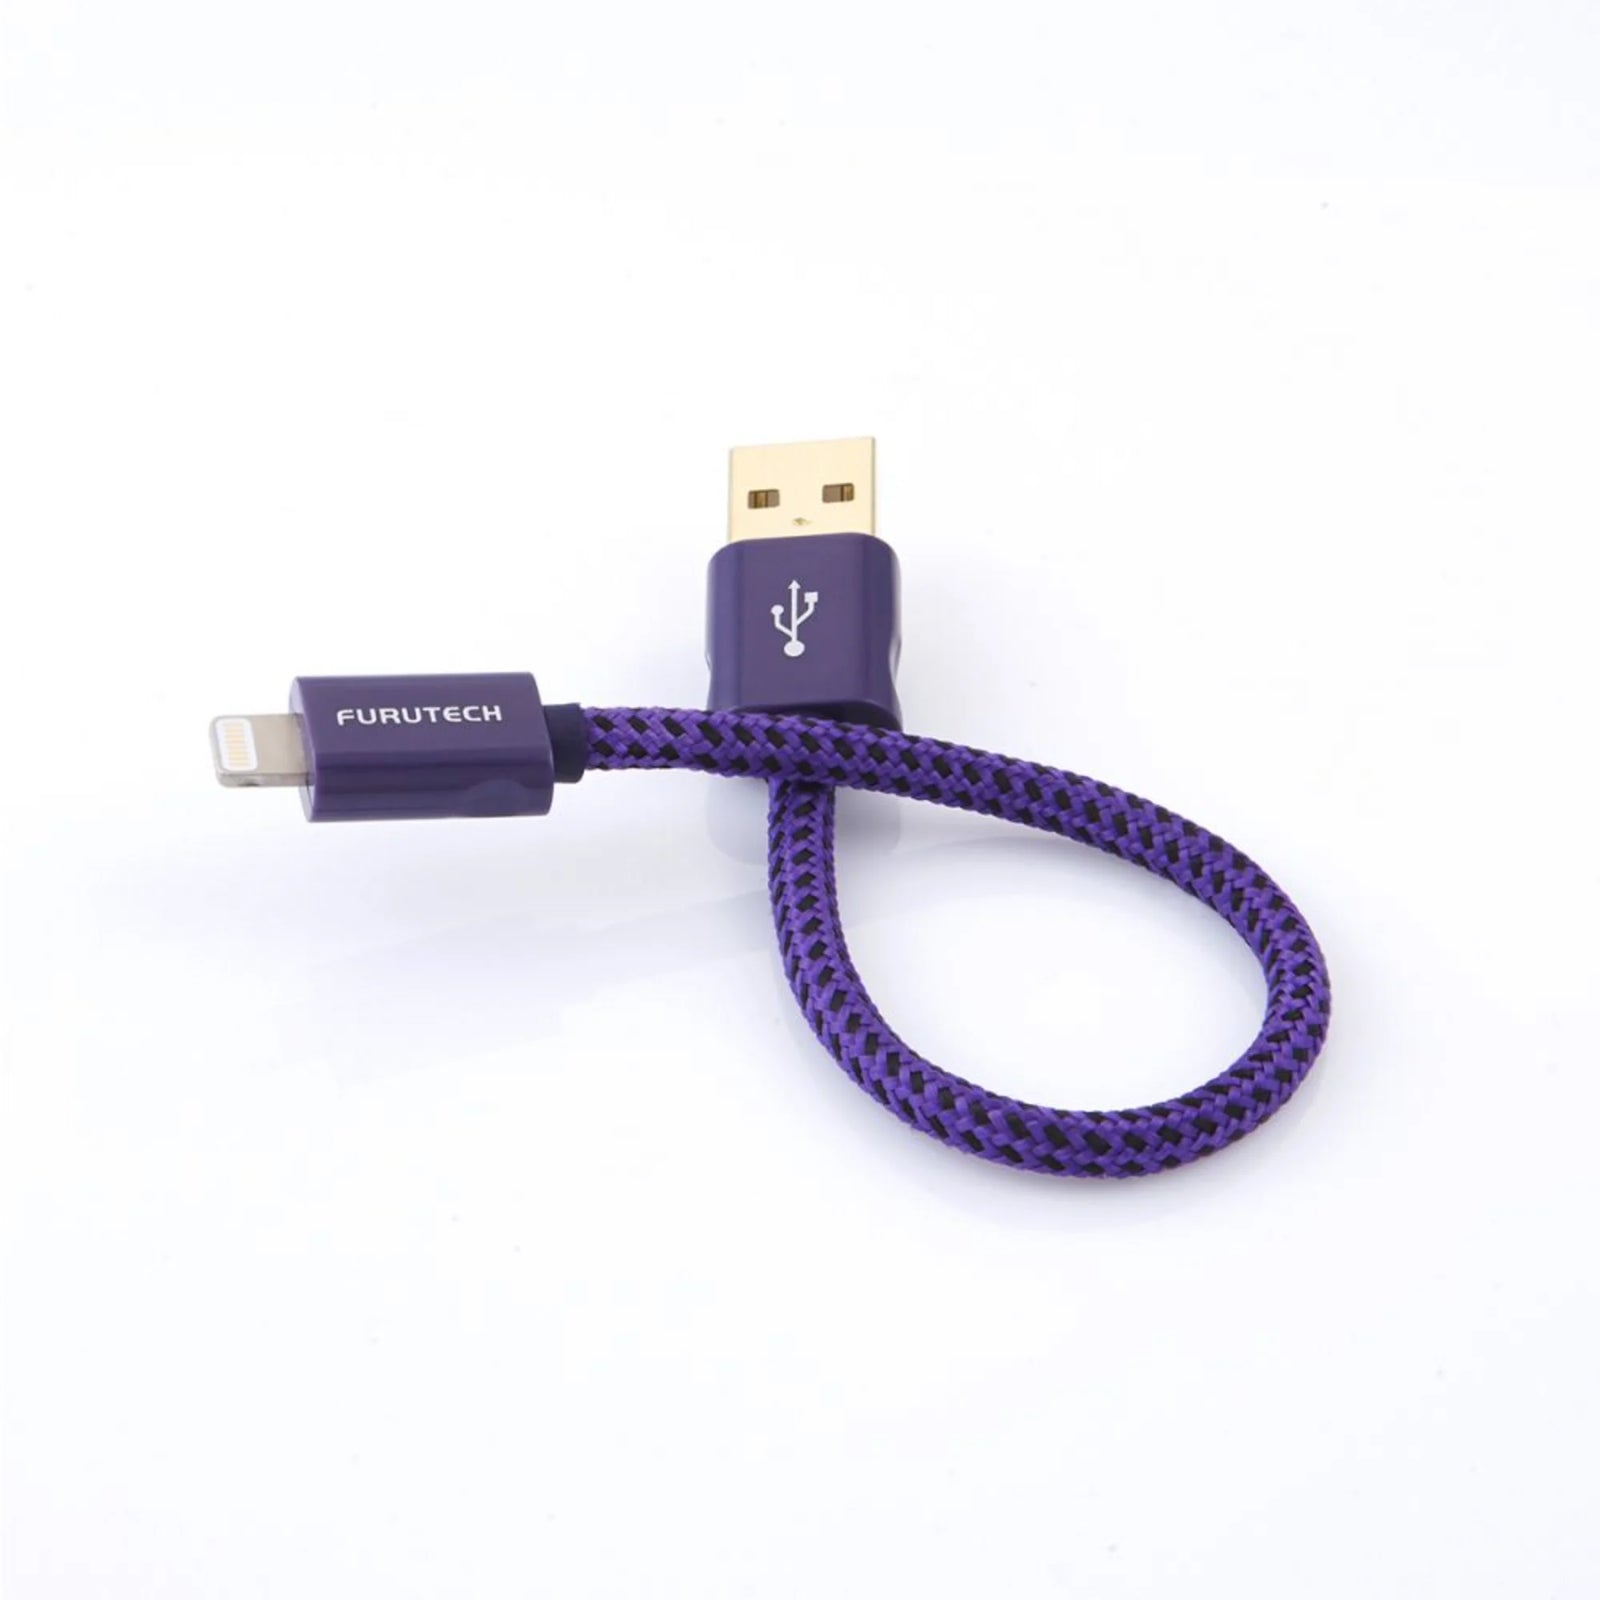 GT8-A-0.1M High End performance i-device cable Lightning to USB-A (0.1M) GT8-A-0.18M High End performance i-device cable Lightning to USB-A (0.18M) Available at Vinyl Sound